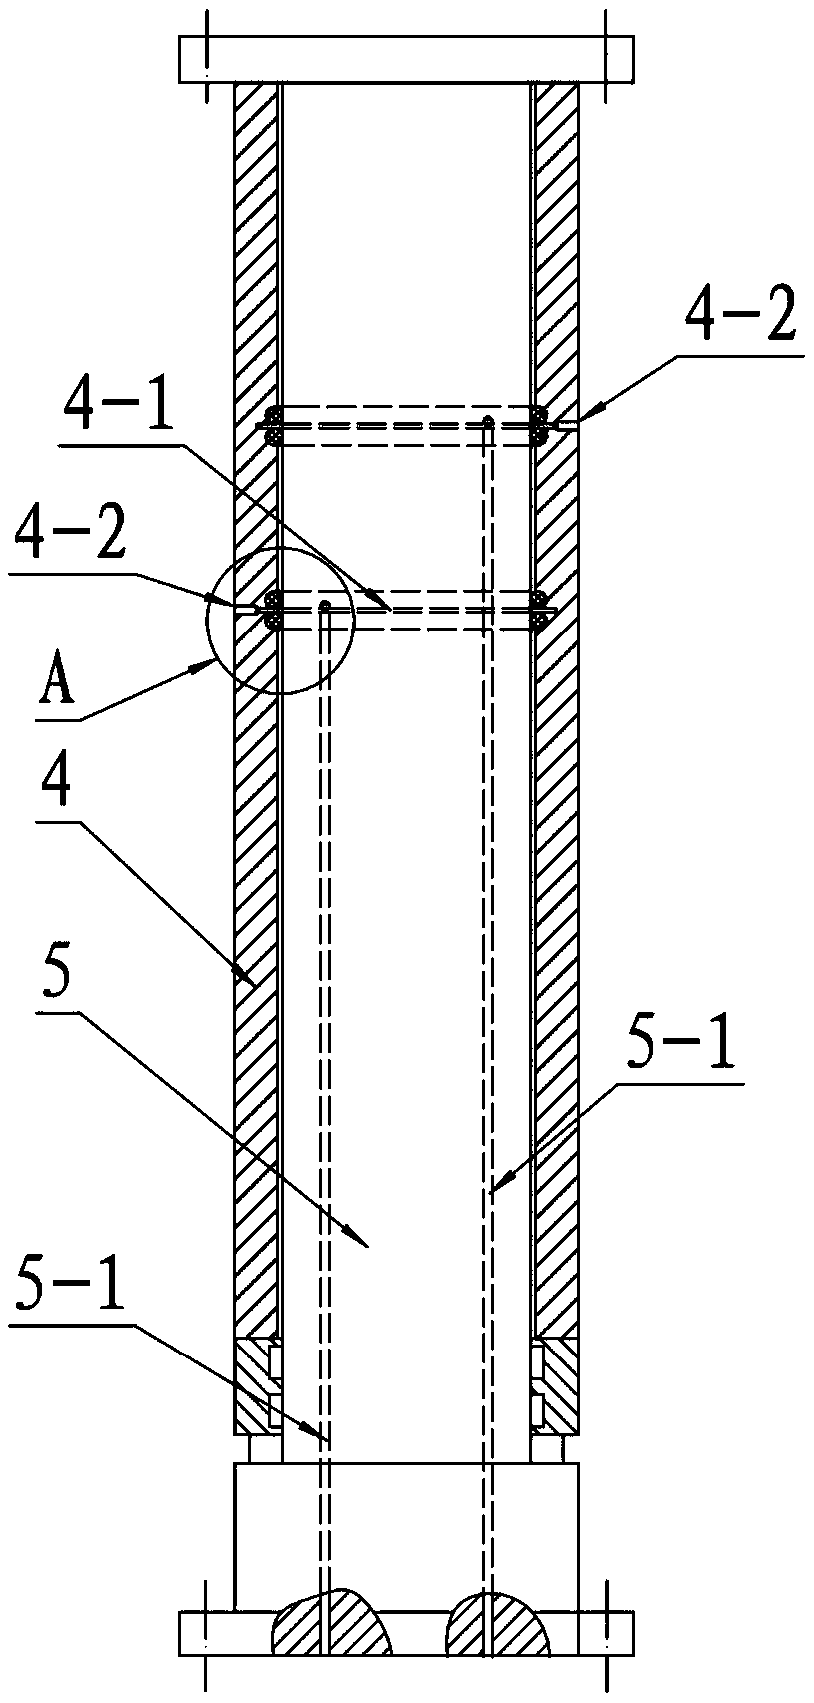 Argon blowing method of ladle turret and steel ladle argon blowing turret in continuous casting mode